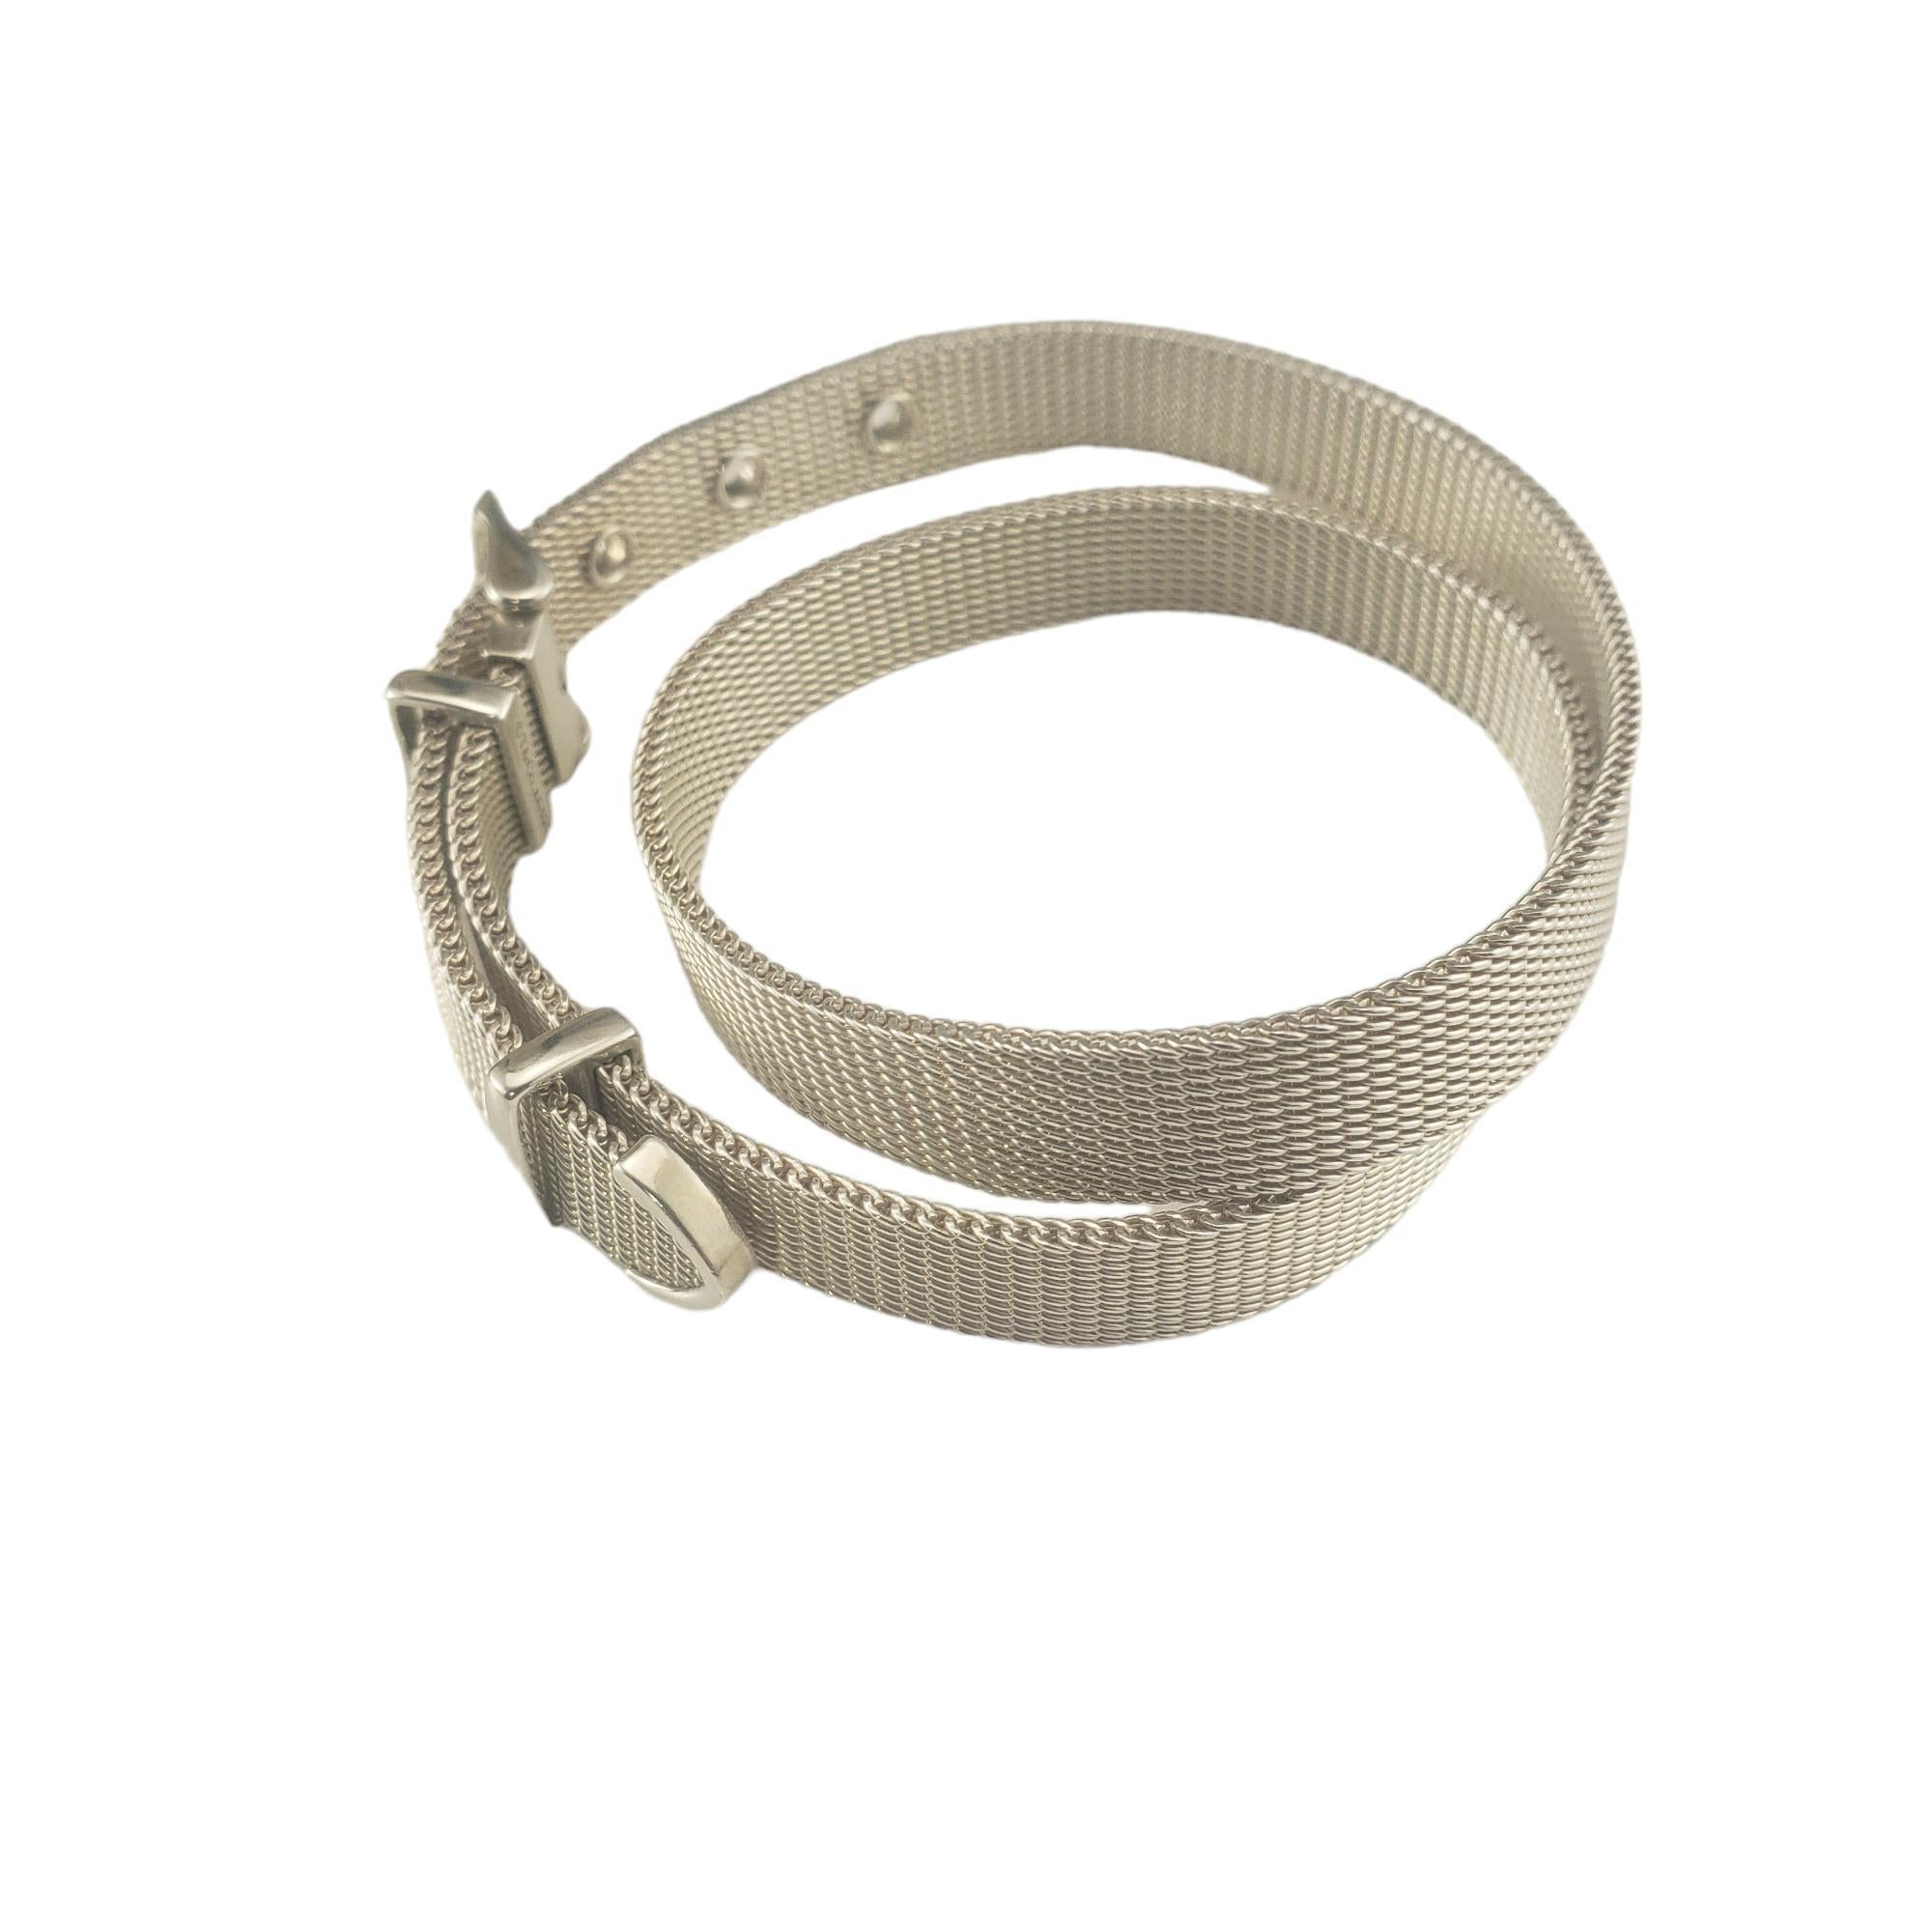 Tiffany & Co. Somerset Double Wrap Sterling Bracelet- 

This elegant double wrap mesh bracelet is crafted in beautifully detailed sterling silver by Tiffany & Co.  Secured with an adjustable buckle.

*Slight bend noted in mesh due to